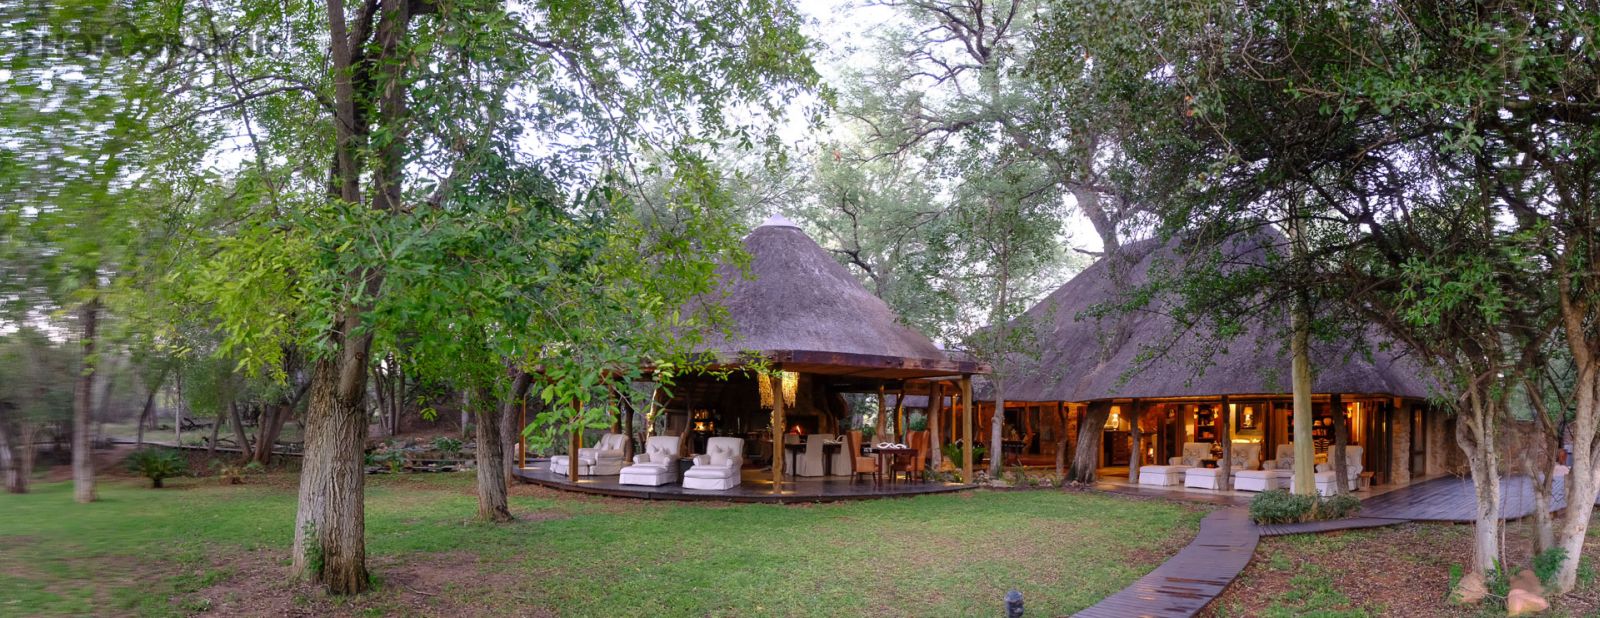 Exterior view at Dulini in South Africa 